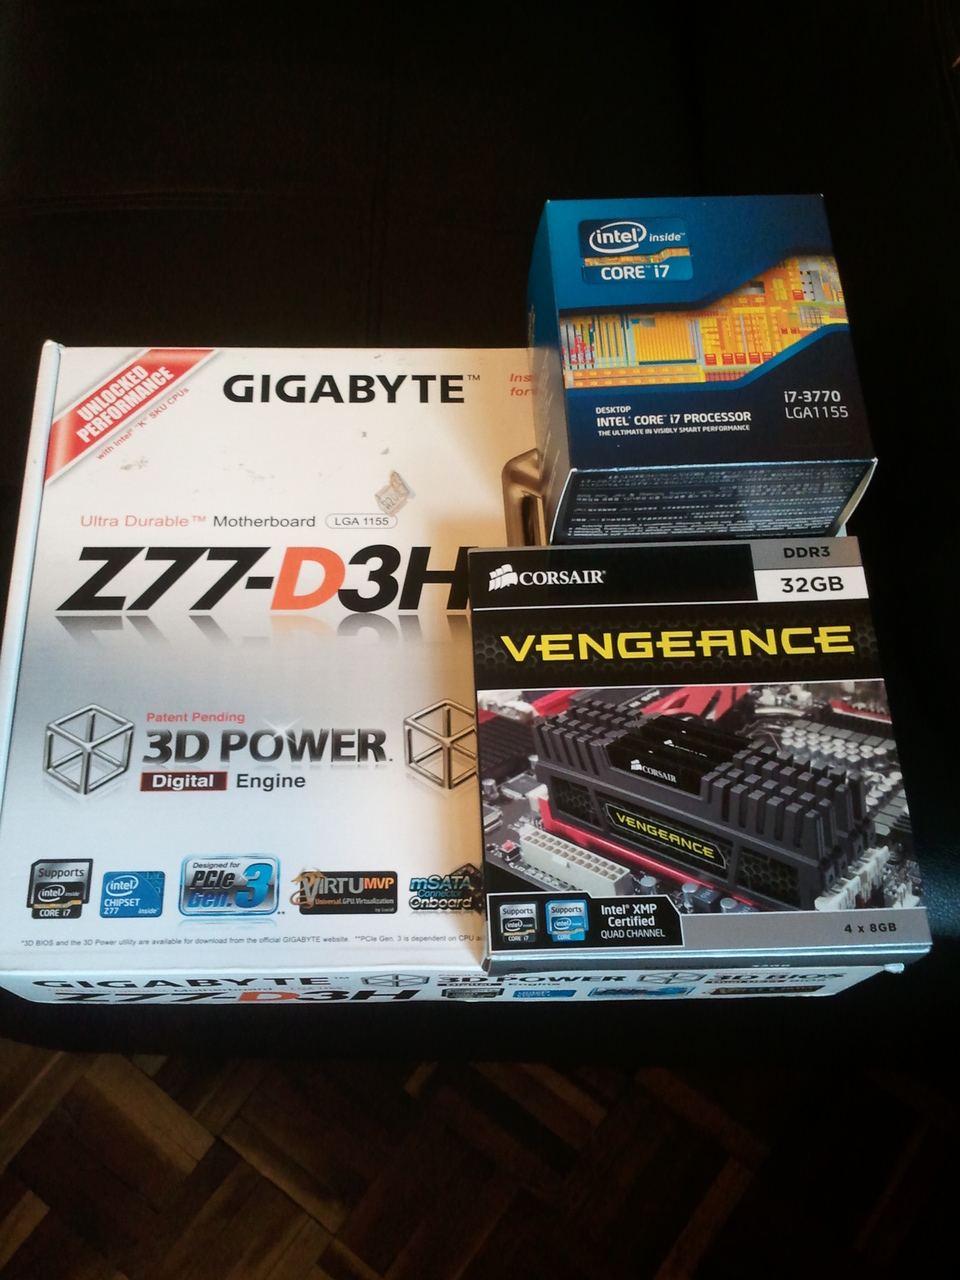 New parts: motherboard, CPU, and RAM